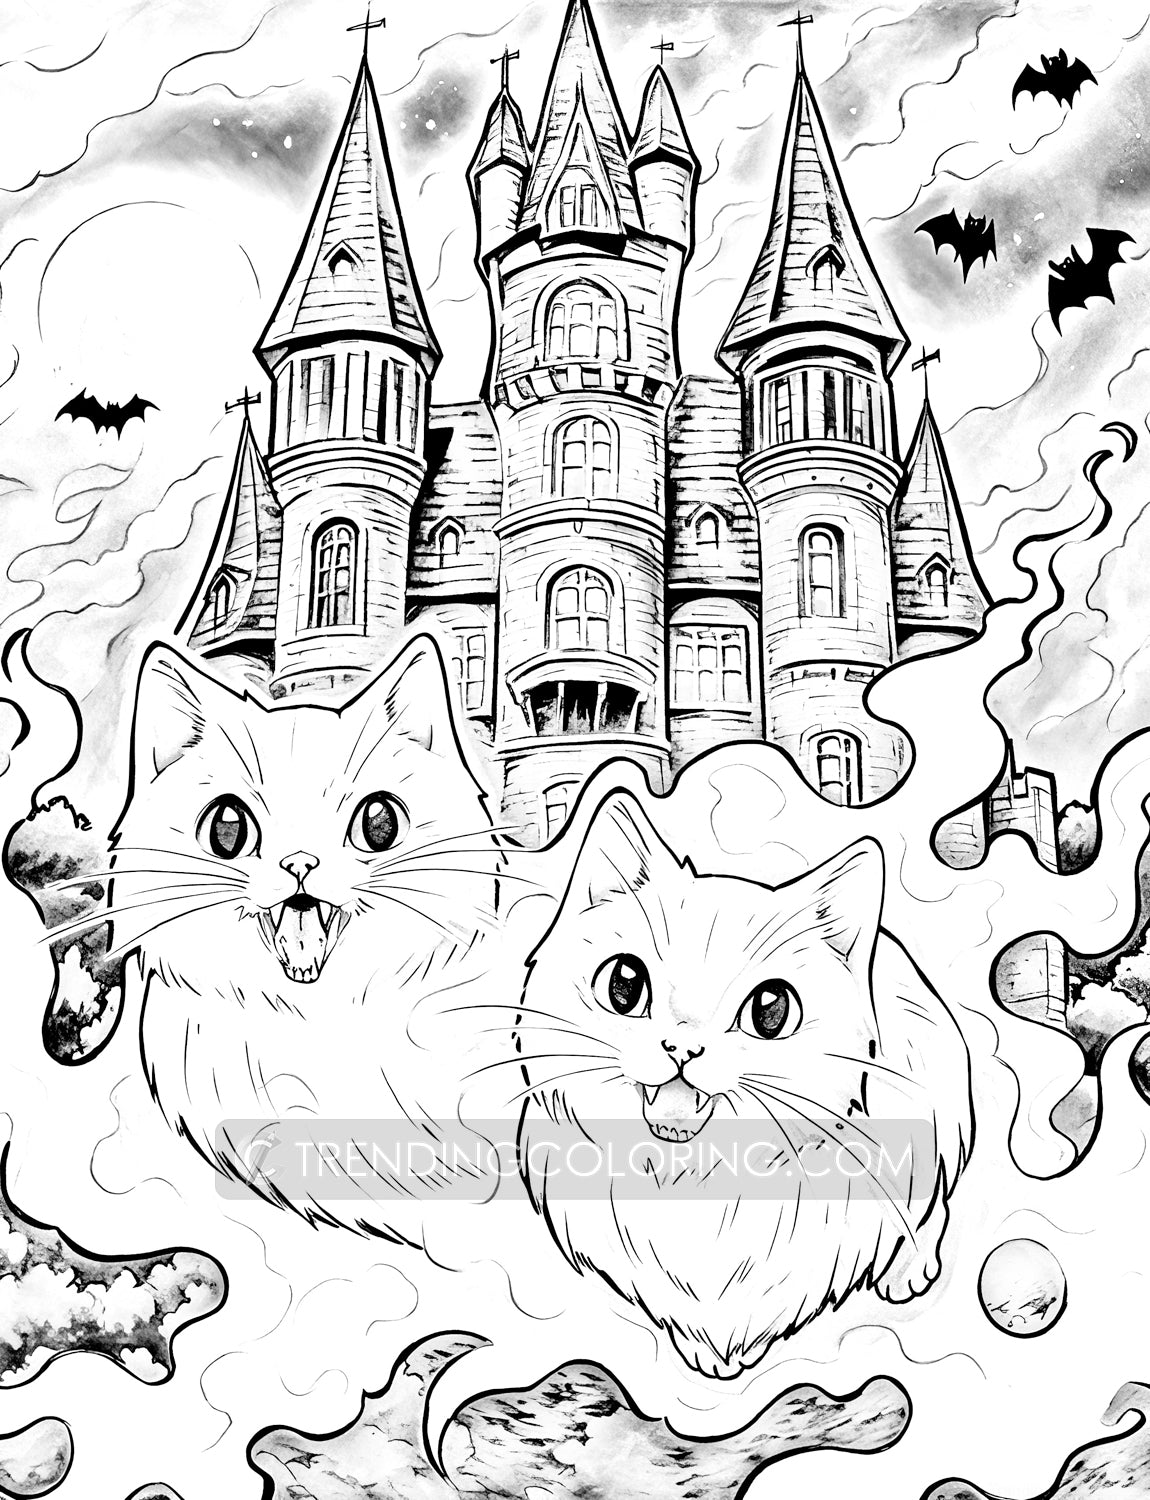 25 Meowloween Coloring Pages - Halloween Coloring - Instant Download - Printable